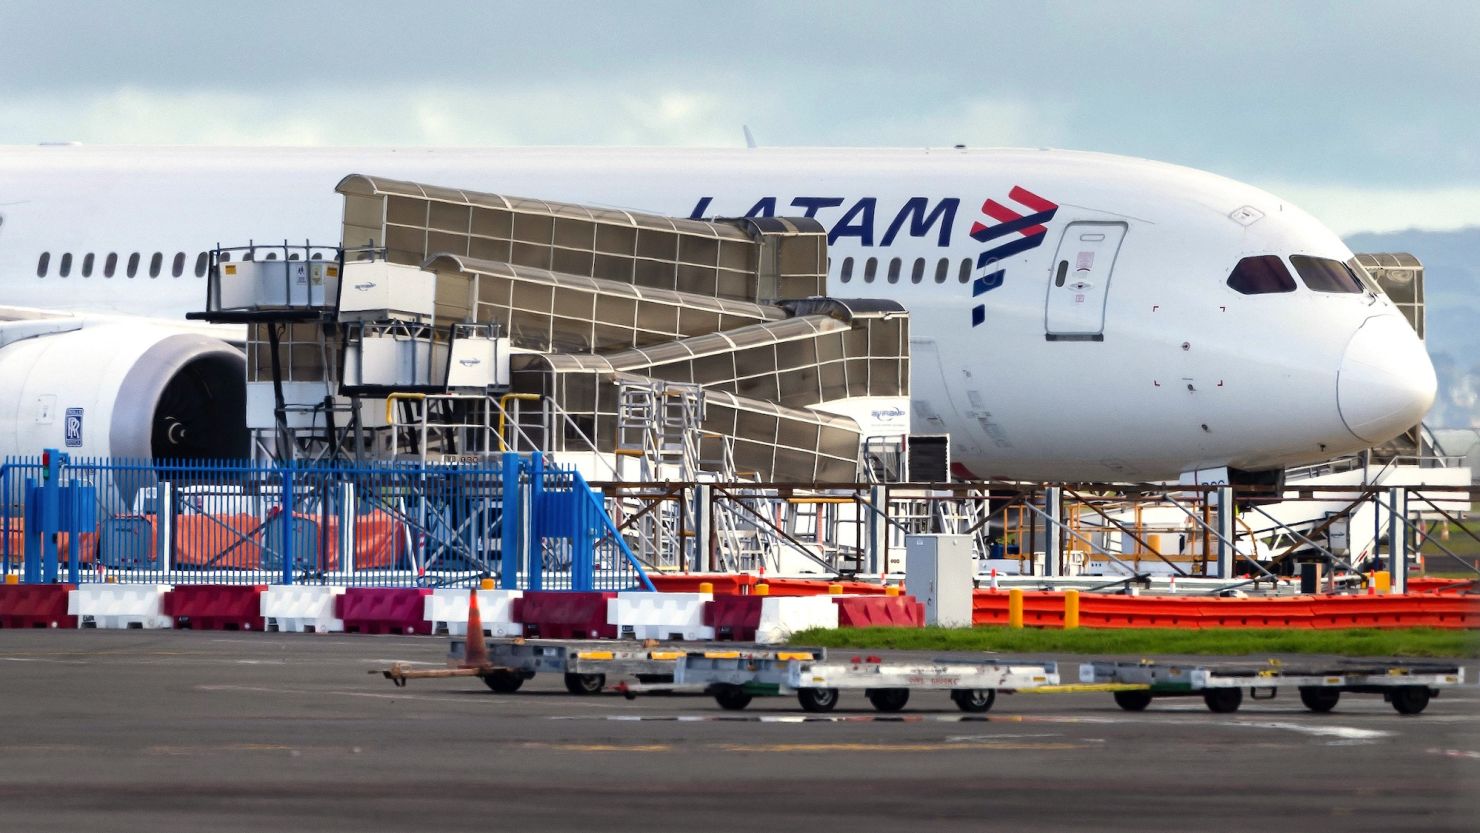 The LATAM Airlines Boeing 787 Dreamliner that suddenly lost altitude mid-flight on the tarmac of the Auckland International Airport on March 12, 2024.